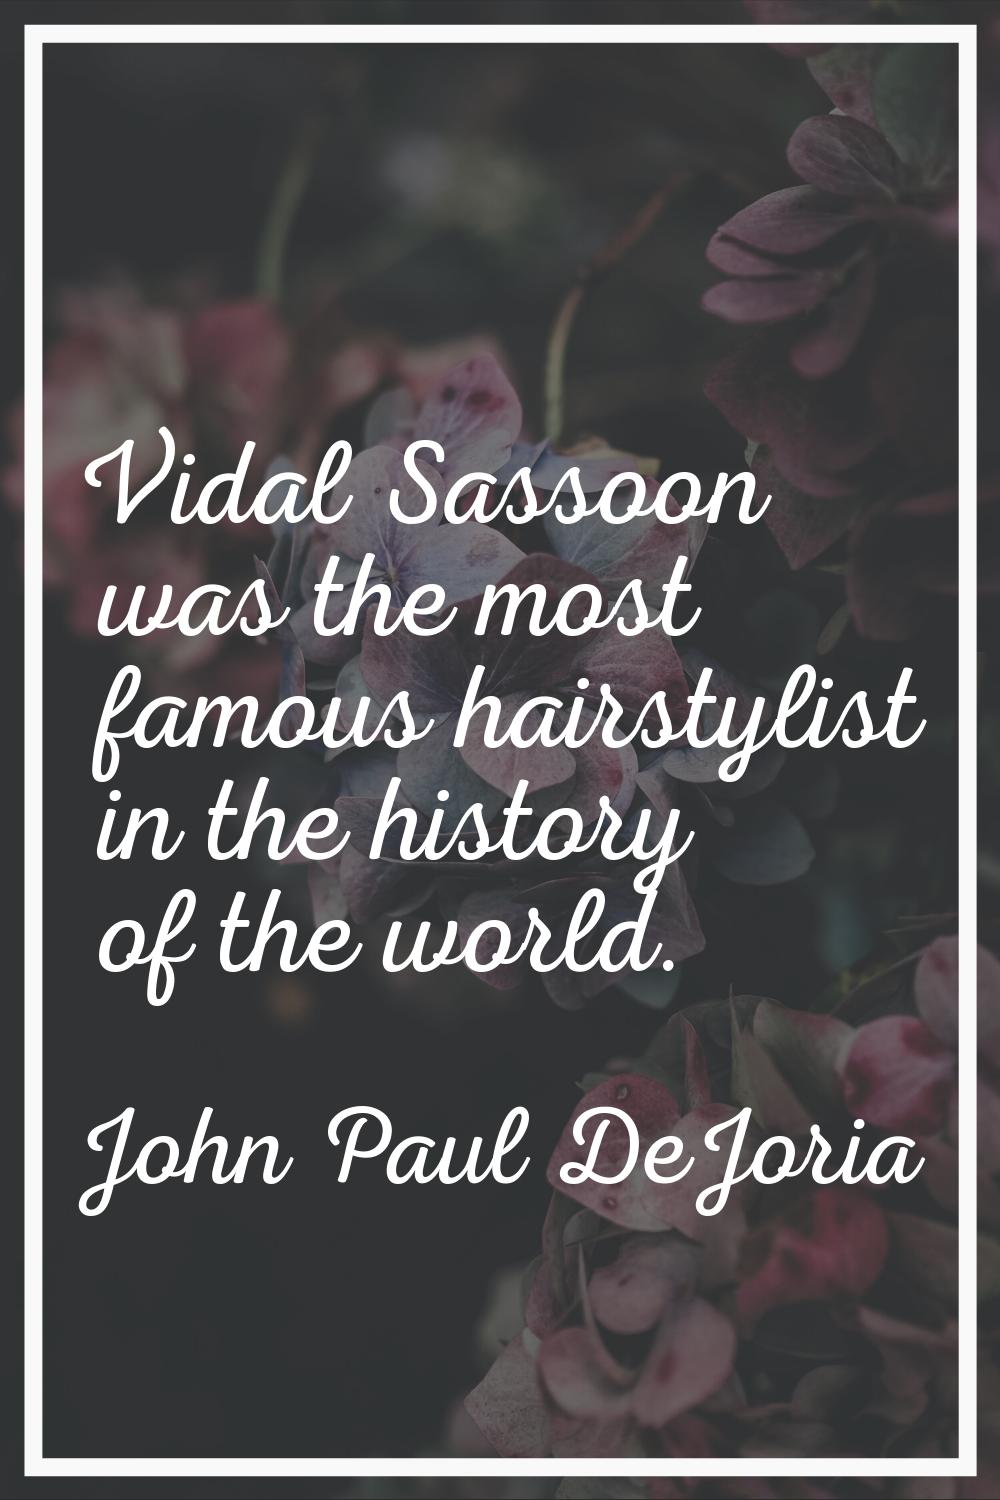 Vidal Sassoon was the most famous hairstylist in the history of the world.